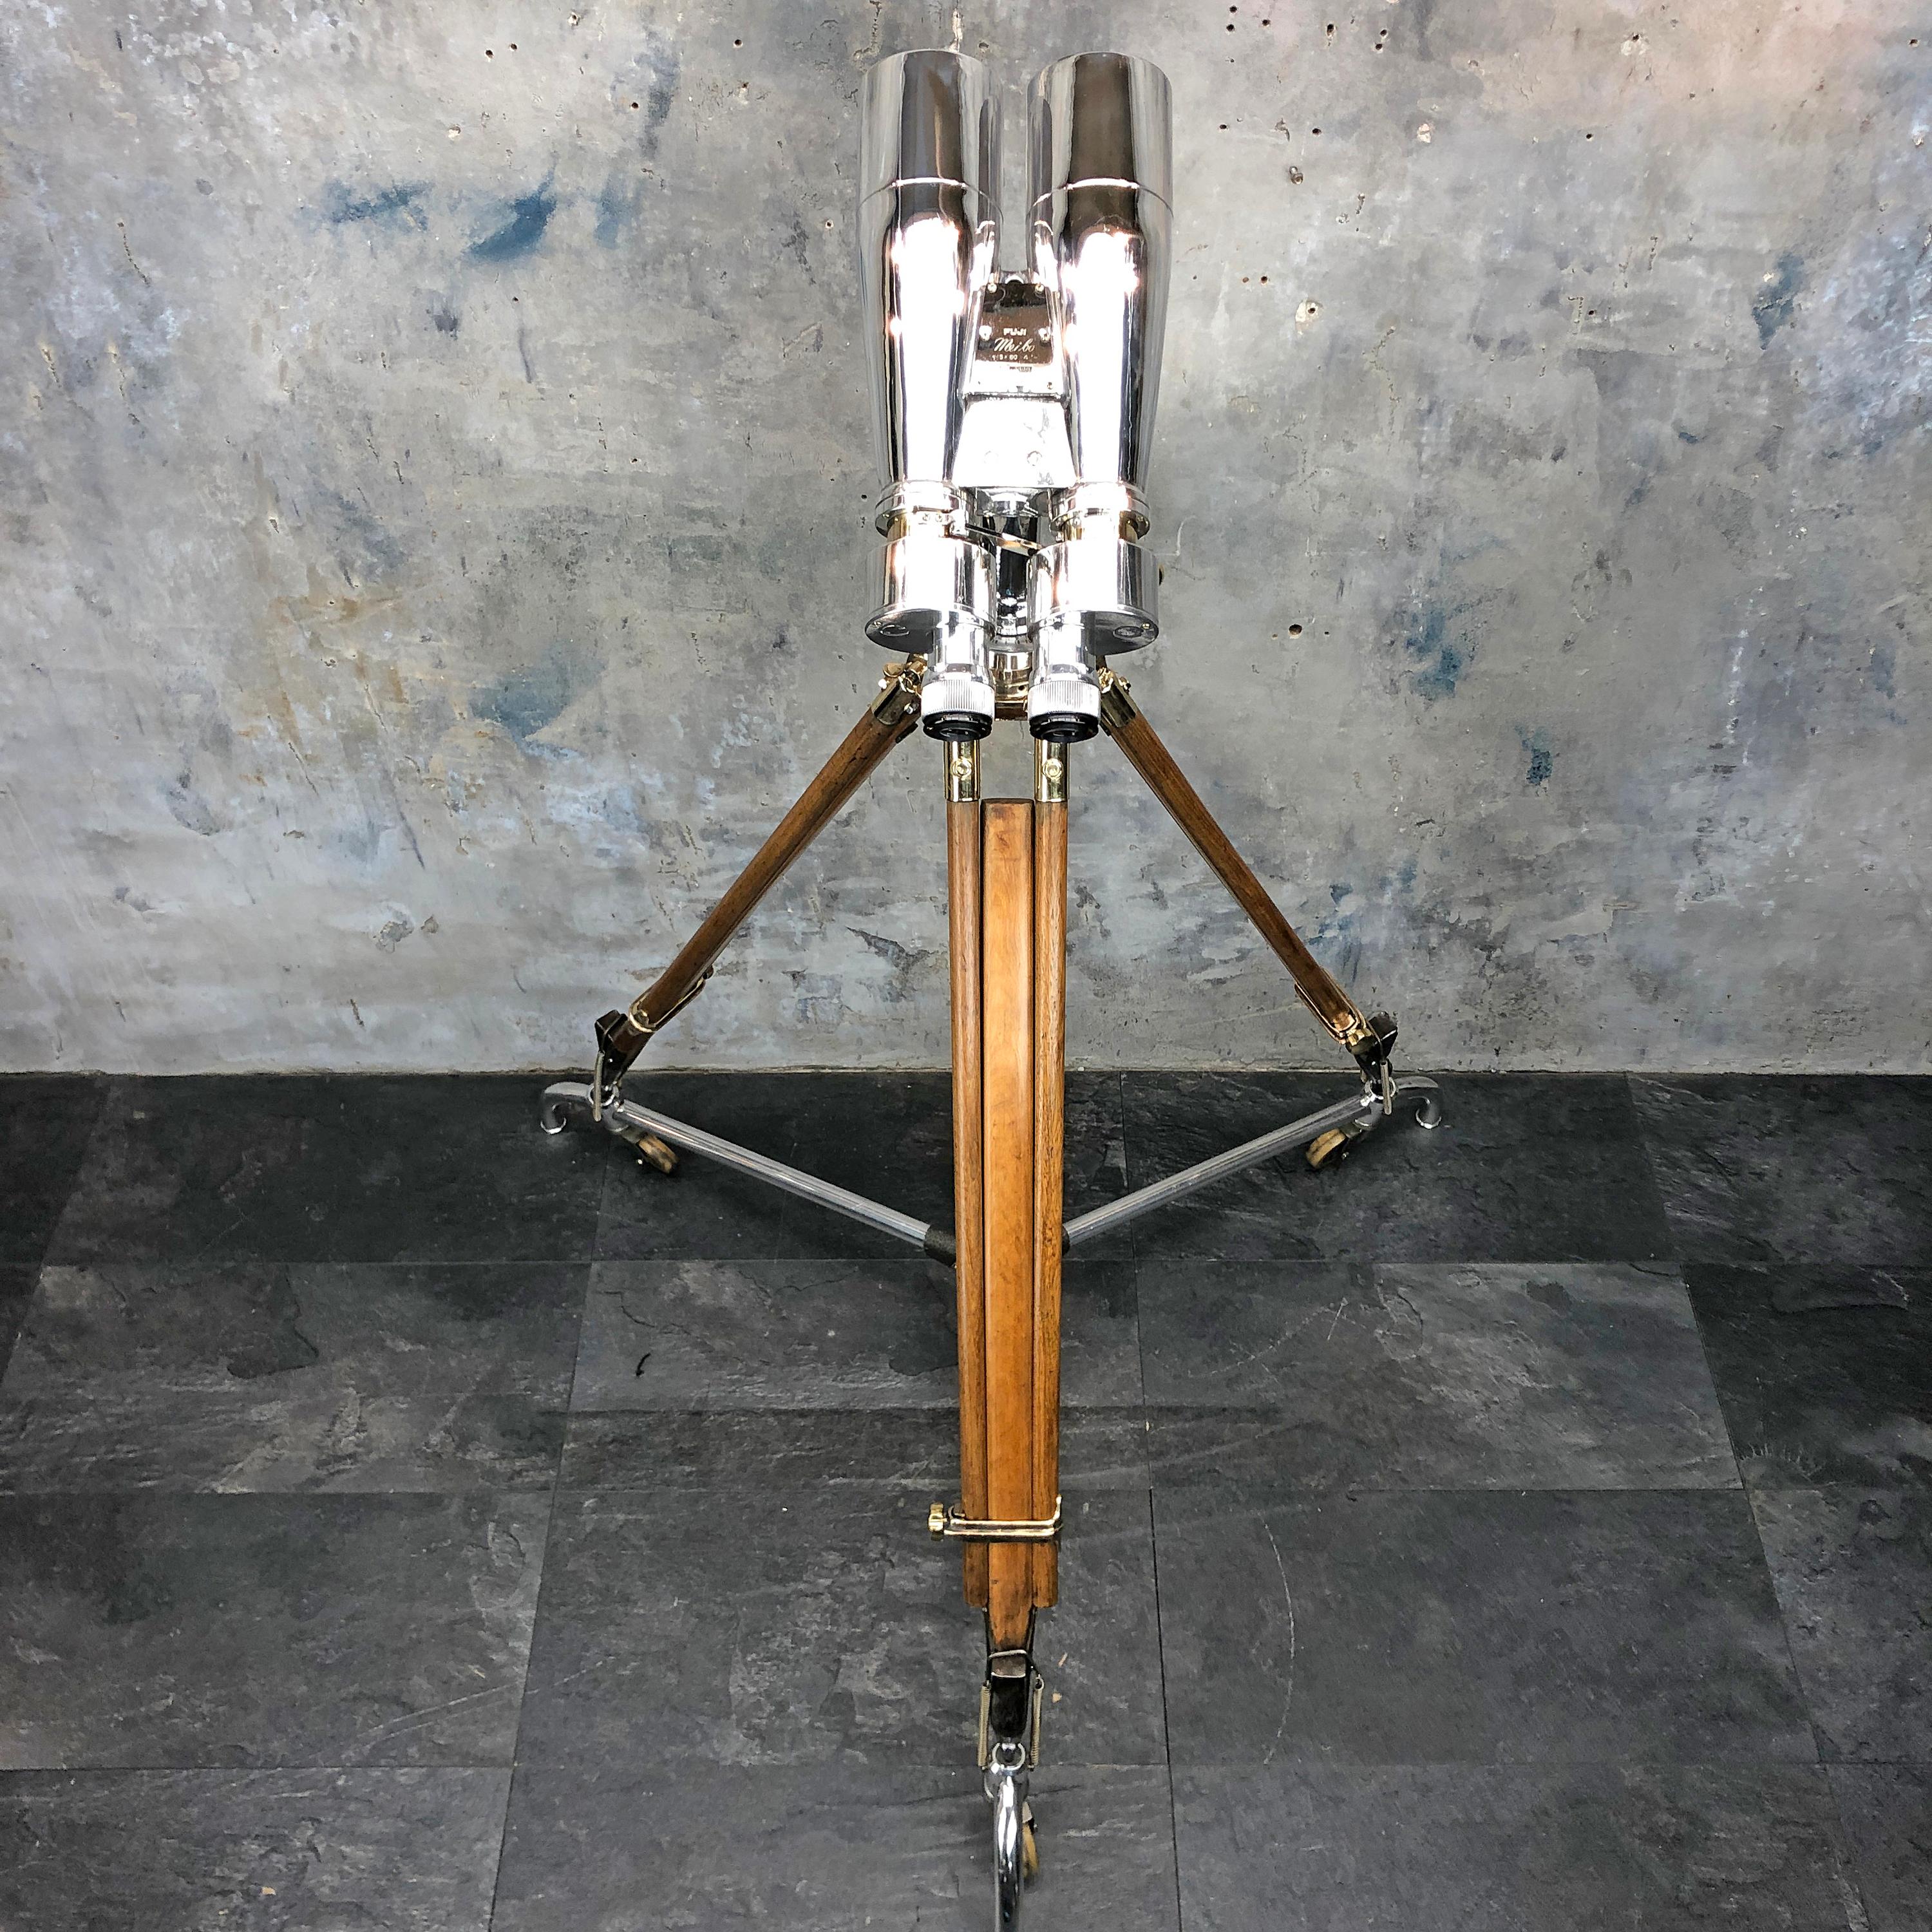 Japanese Fuji Meibo Observation Binoculars 15 x 80 - 4 degree field of view.

A large pair of Japanese ex-navy observation binoculars mounted on an antique 1940's bronze, brass and hardwood tripod. We have also included a tripod dolly which allow